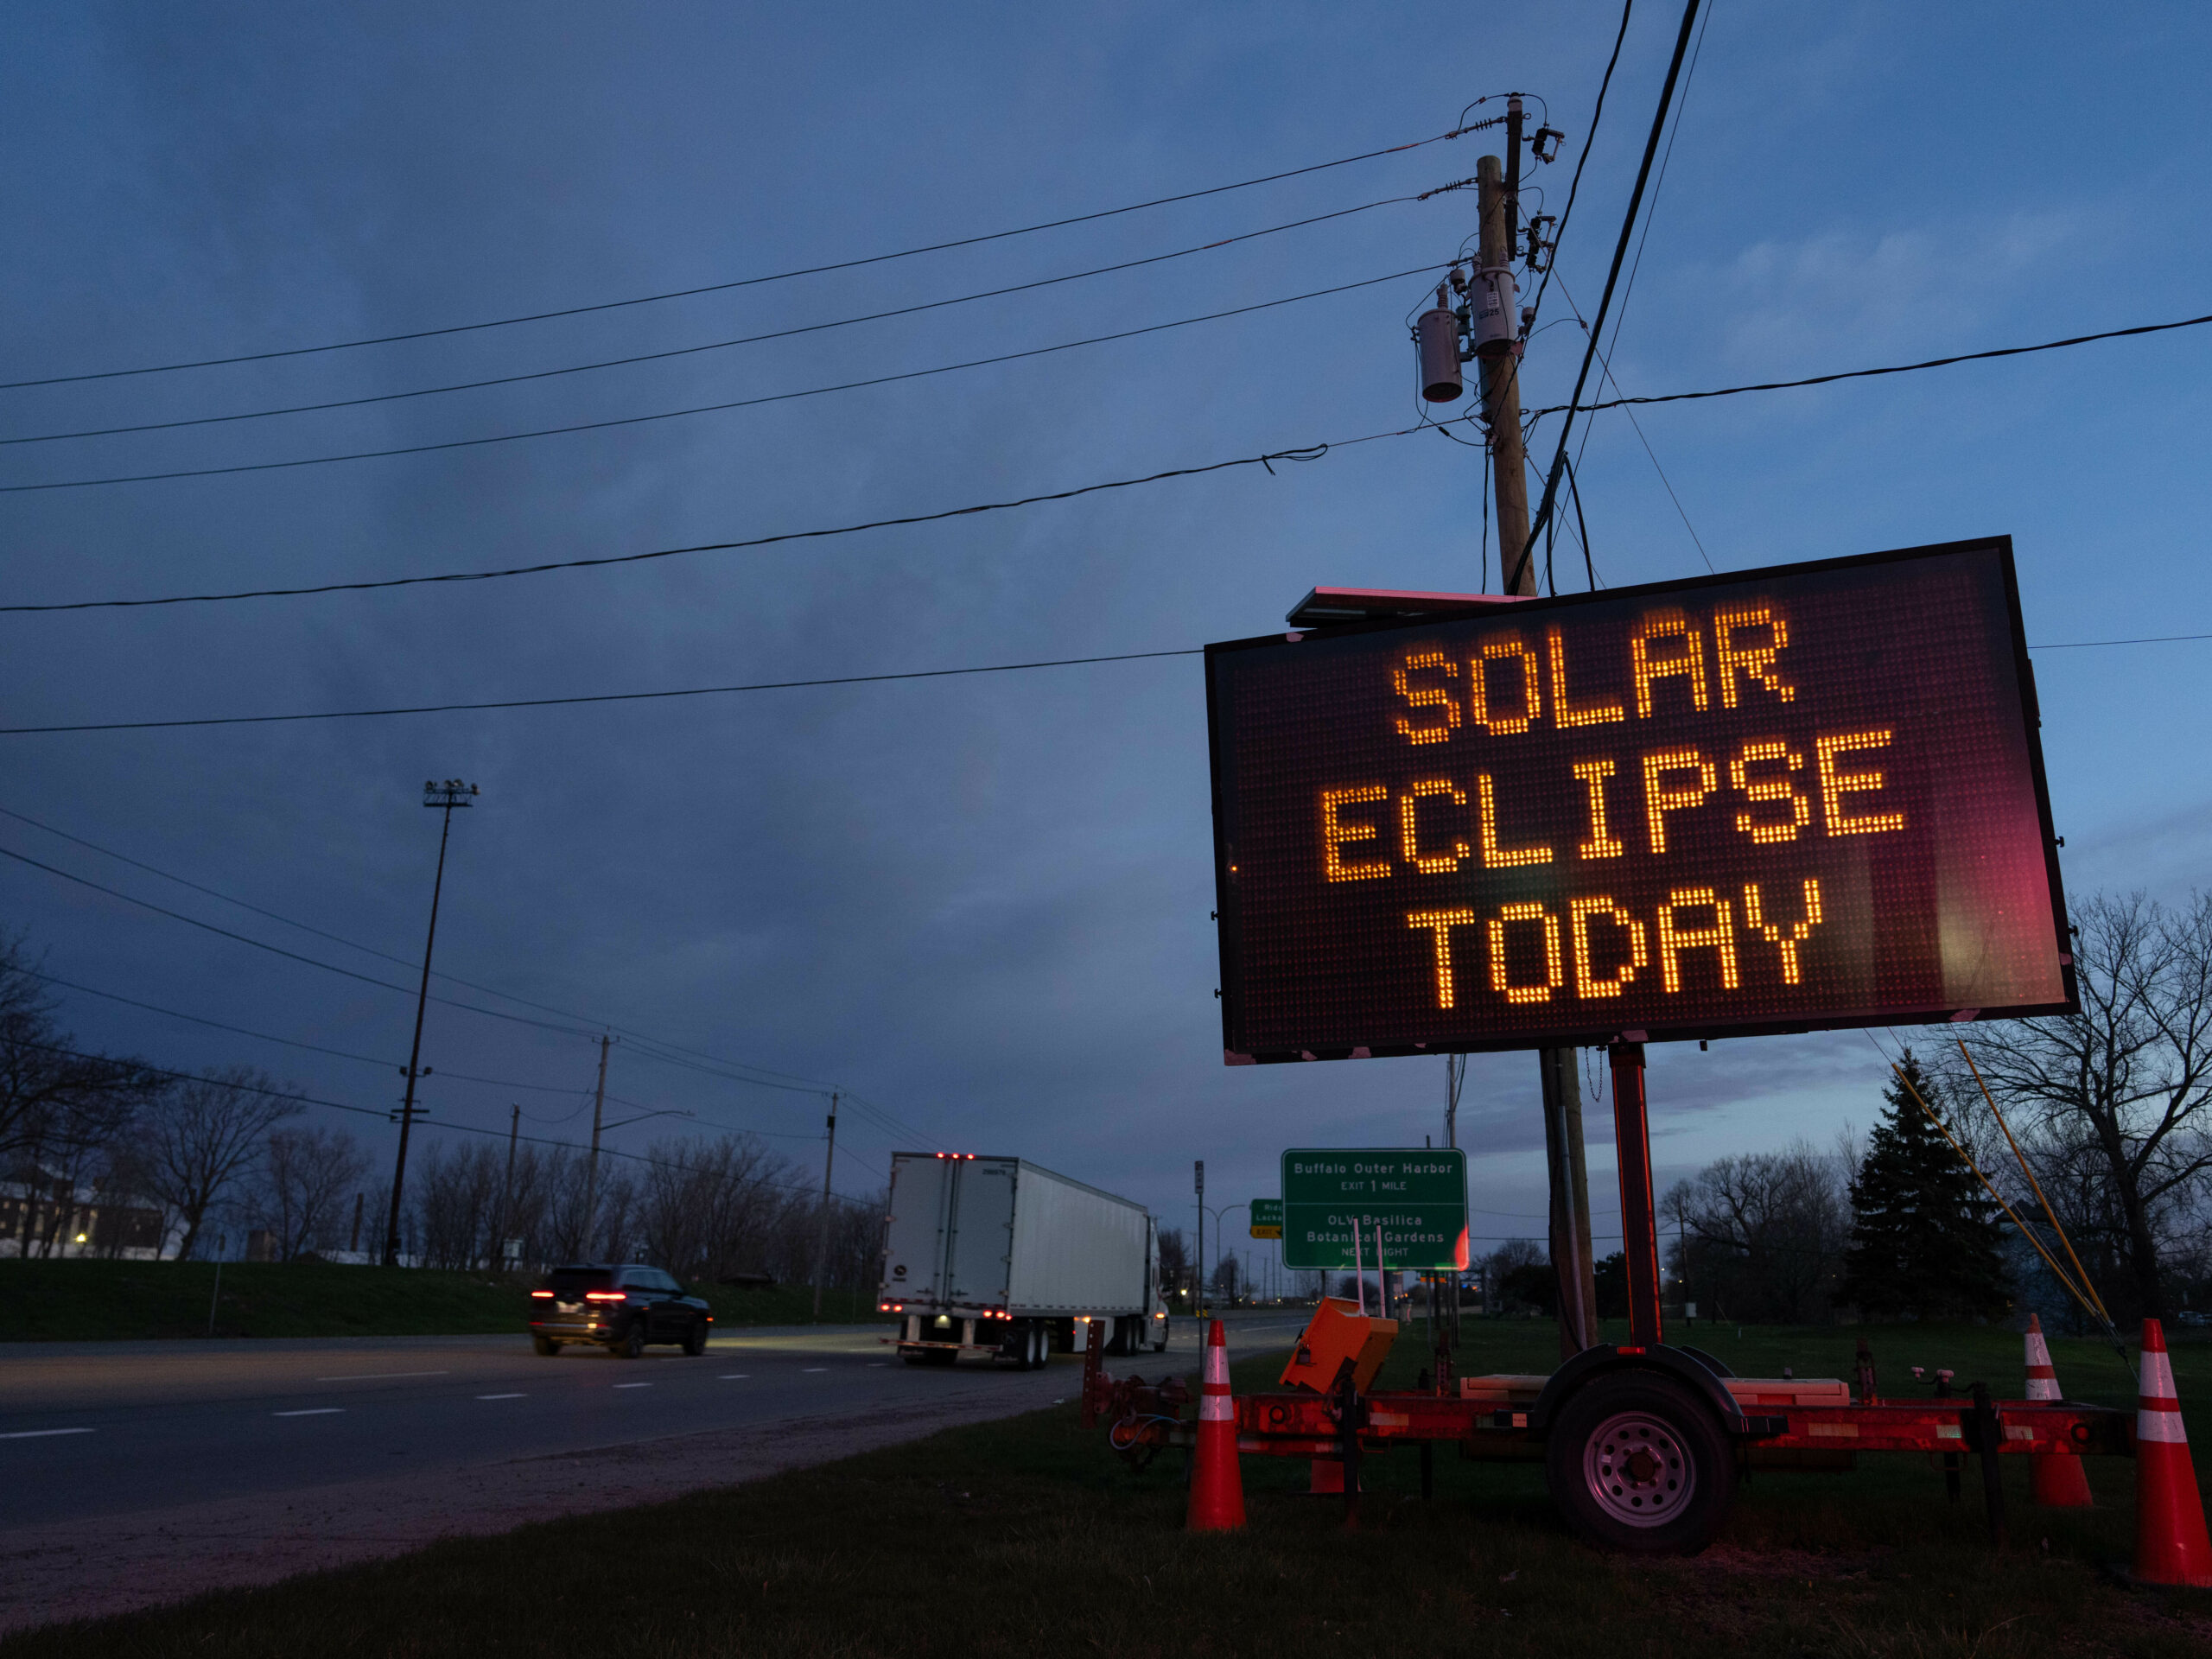 A road sign in Lackawanna, N.Y., advertises the upcoming eclipse on Monday.